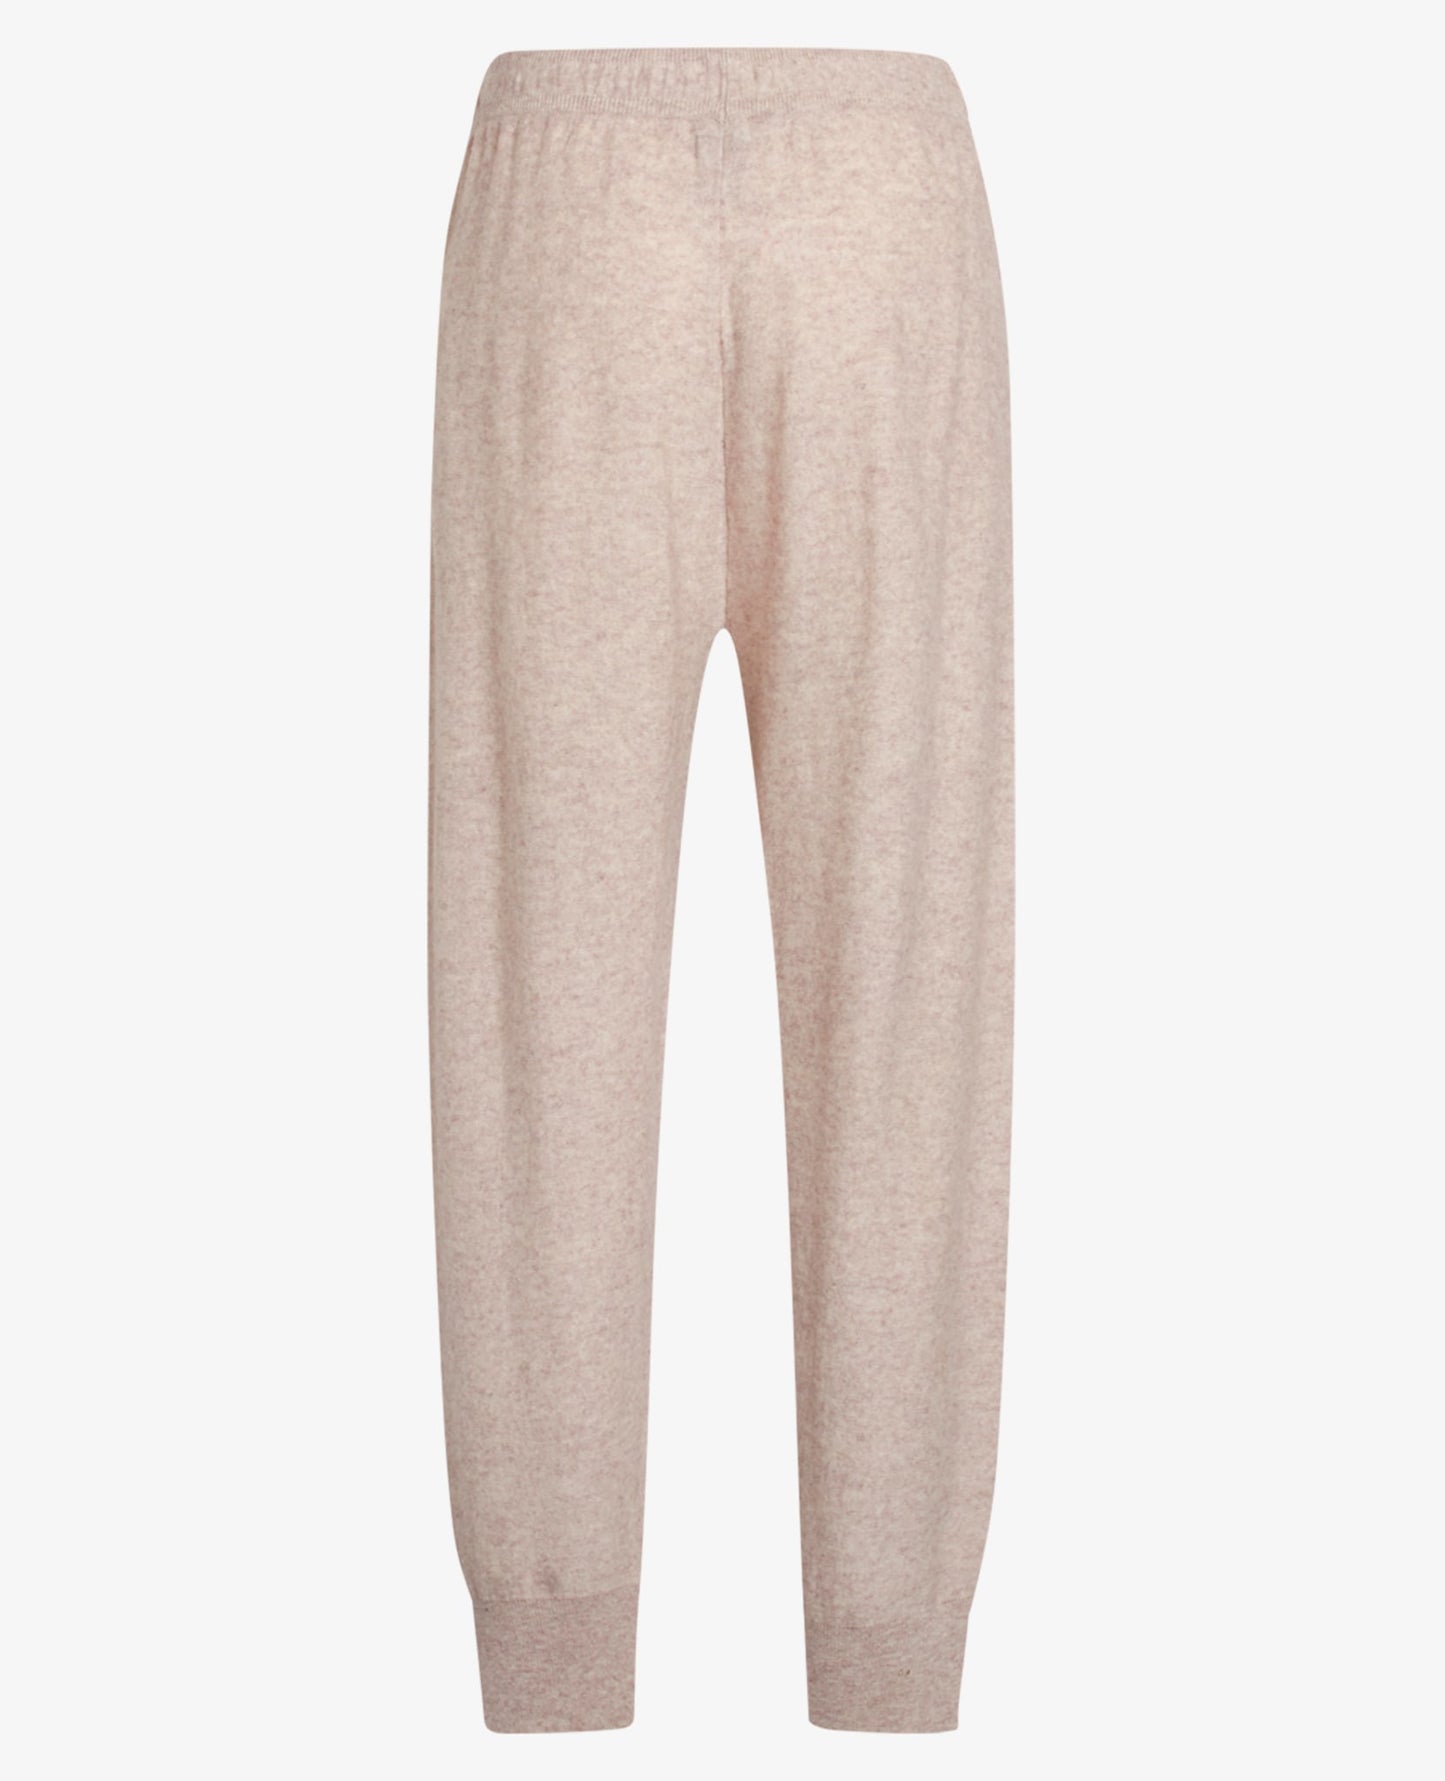 SOFT CASHMERE KNIT TROUSERS